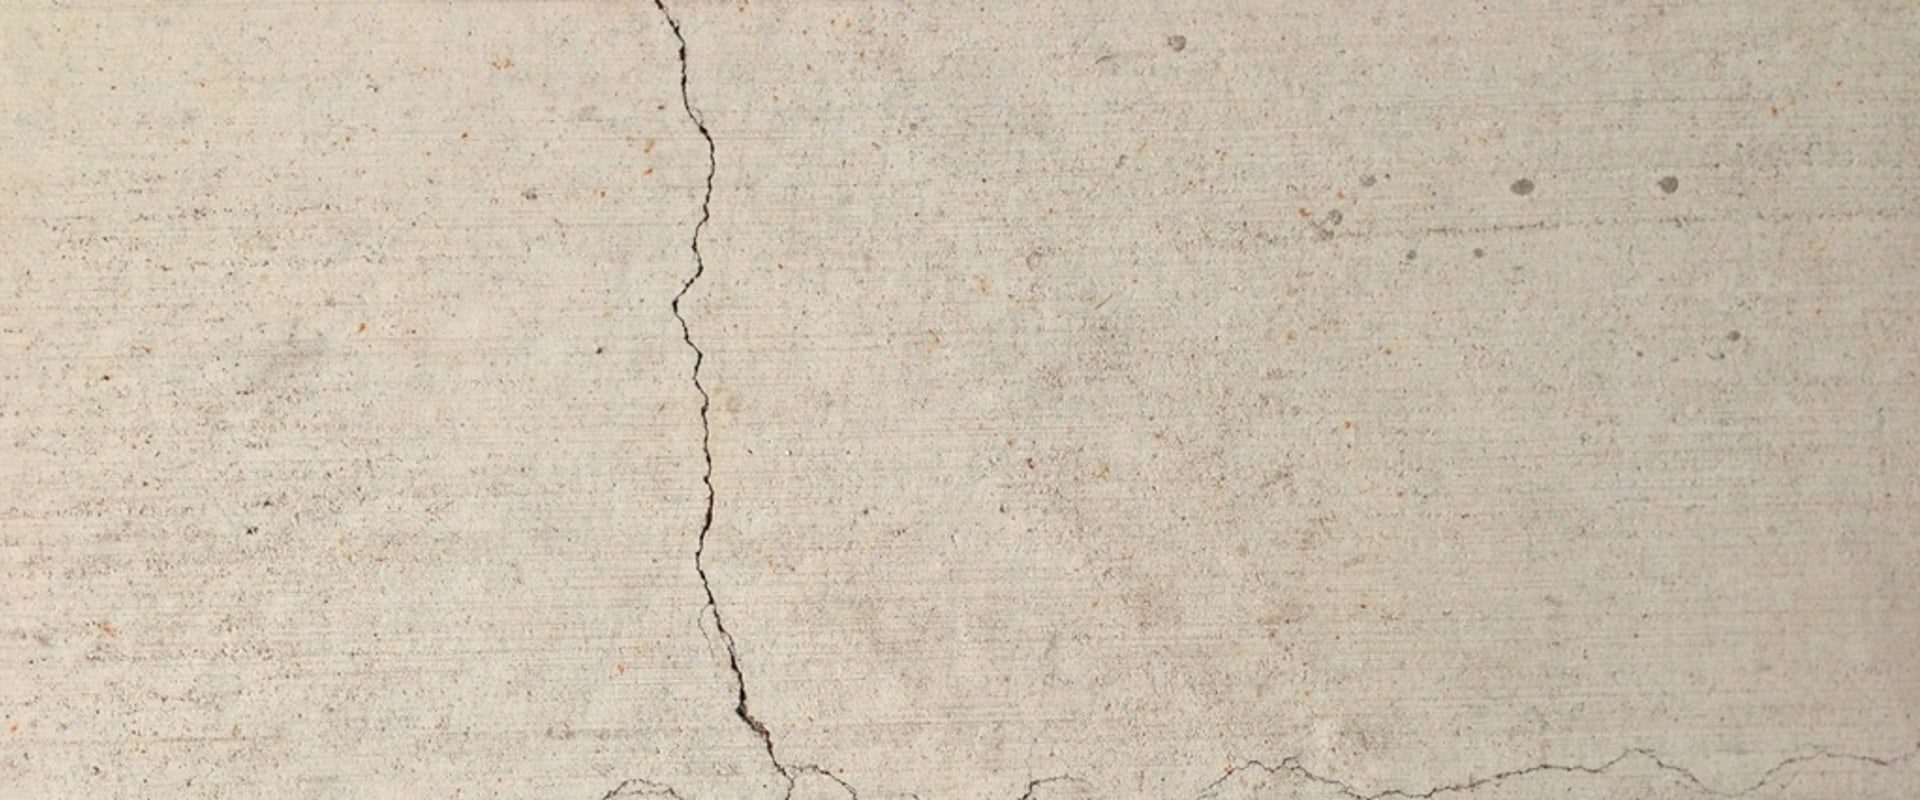 Why are cracks in concrete bad?